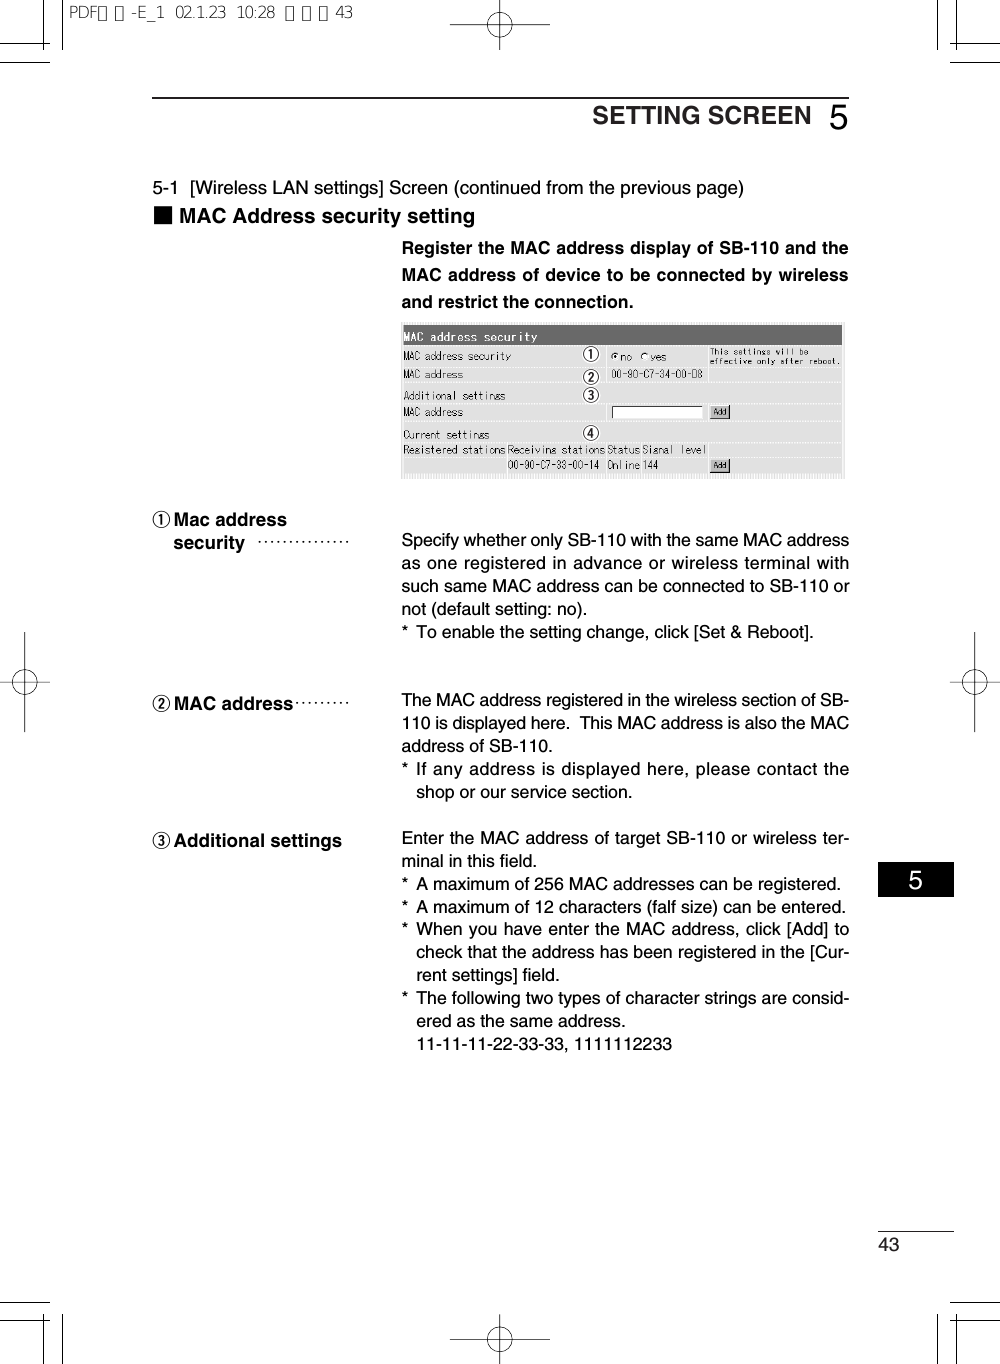 43SETTING SCREEN 555-1  [Wireless LAN settings] Screen (continued from the previous page)■MAC Address security settingRegister the MAC address display of SB-110 and theMAC address of device to be connected by wirelessand restrict the connection.Specify whether only SB-110 with the same MAC addressas one registered in advance or wireless terminal withsuch same MAC address can be connected to SB-110 ornot (default setting: no).*  To enable the setting change, click [Set &amp; Reboot].The MAC address registered in the wireless section of SB-110 is displayed here.  This MAC address is also the MACaddress of SB-110.* If any address is displayed here, please contact theshop or our service section.Enter the MAC address of target SB-110 or wireless ter-minal in this field.*  A maximum of 256 MAC addresses can be registered.*  A maximum of 12 characters (falf size) can be entered.* When you have enter the MAC address, click [Add] tocheck that the address has been registered in the [Cur-rent settings] field.*  The following two types of character strings are consid-ered as the same address.11-11-11-22-33-33, 1111112233qMac address security ……………wMAC address………eAdditional settingsqwerPDF取説-E_1  02.1.23  10:28  ページ43